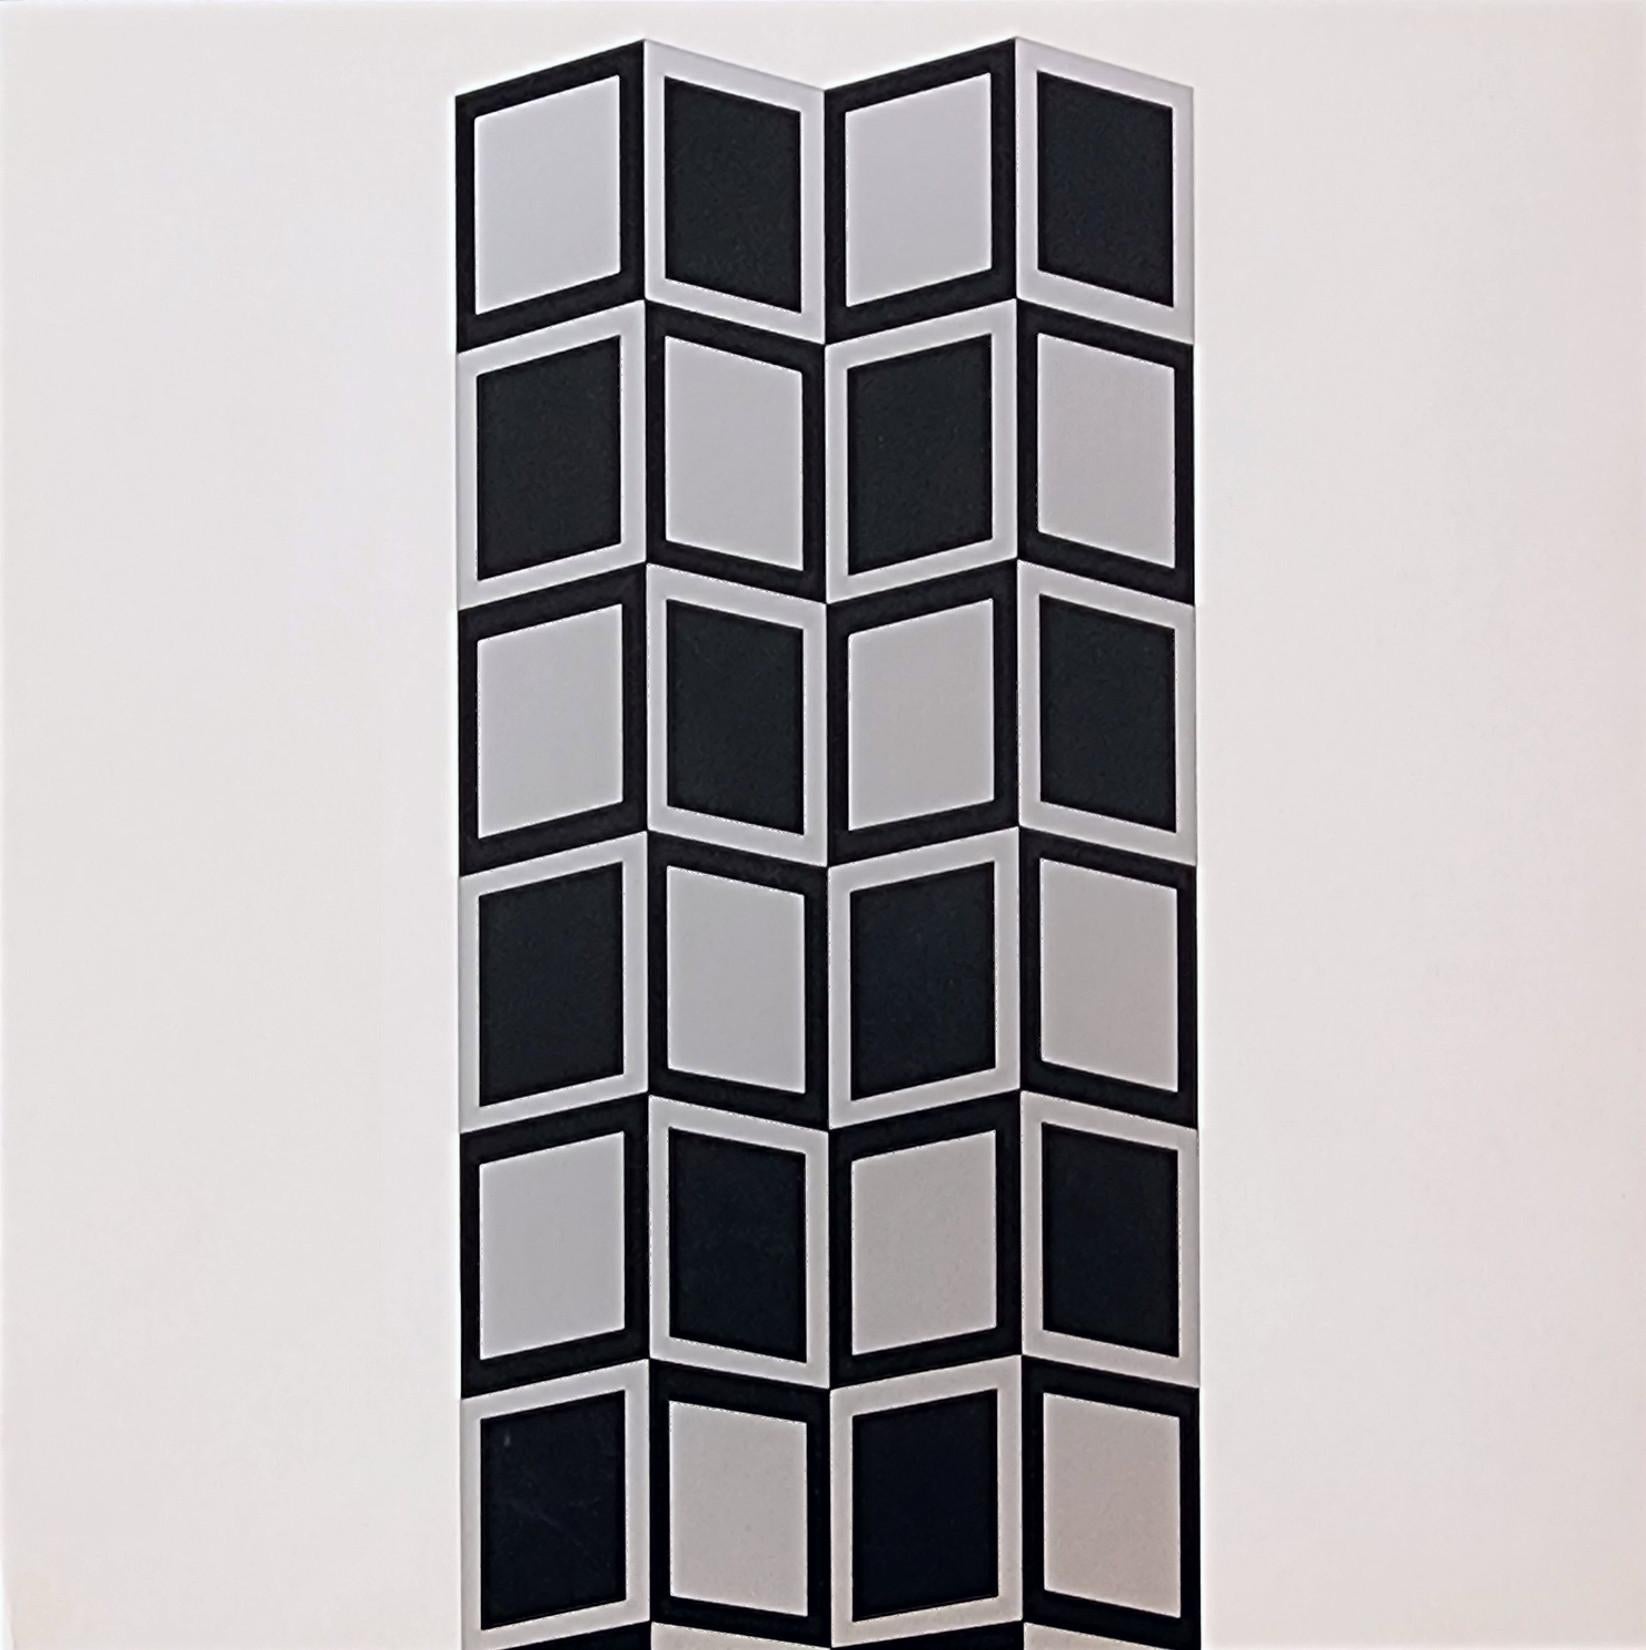 Saeule HK (Detail), 1967 (~36% OFF LIMITED TIME ONLY) - Print by Victor Vasarely